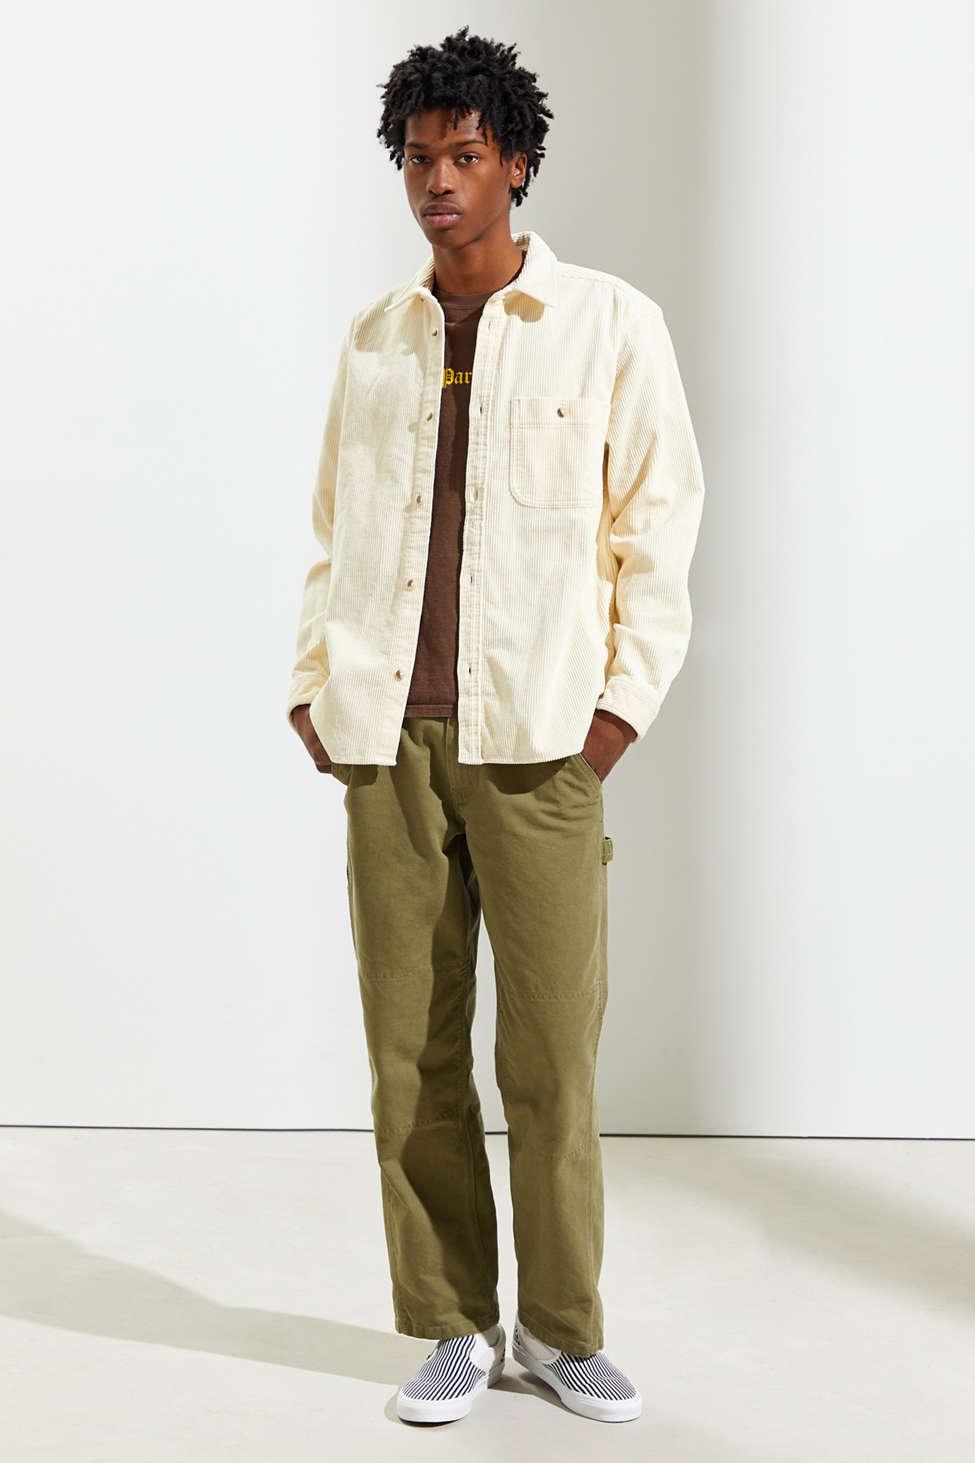 Urban Outfitters Uo Big Corduroy Cotton Work Shirt in Ivory 